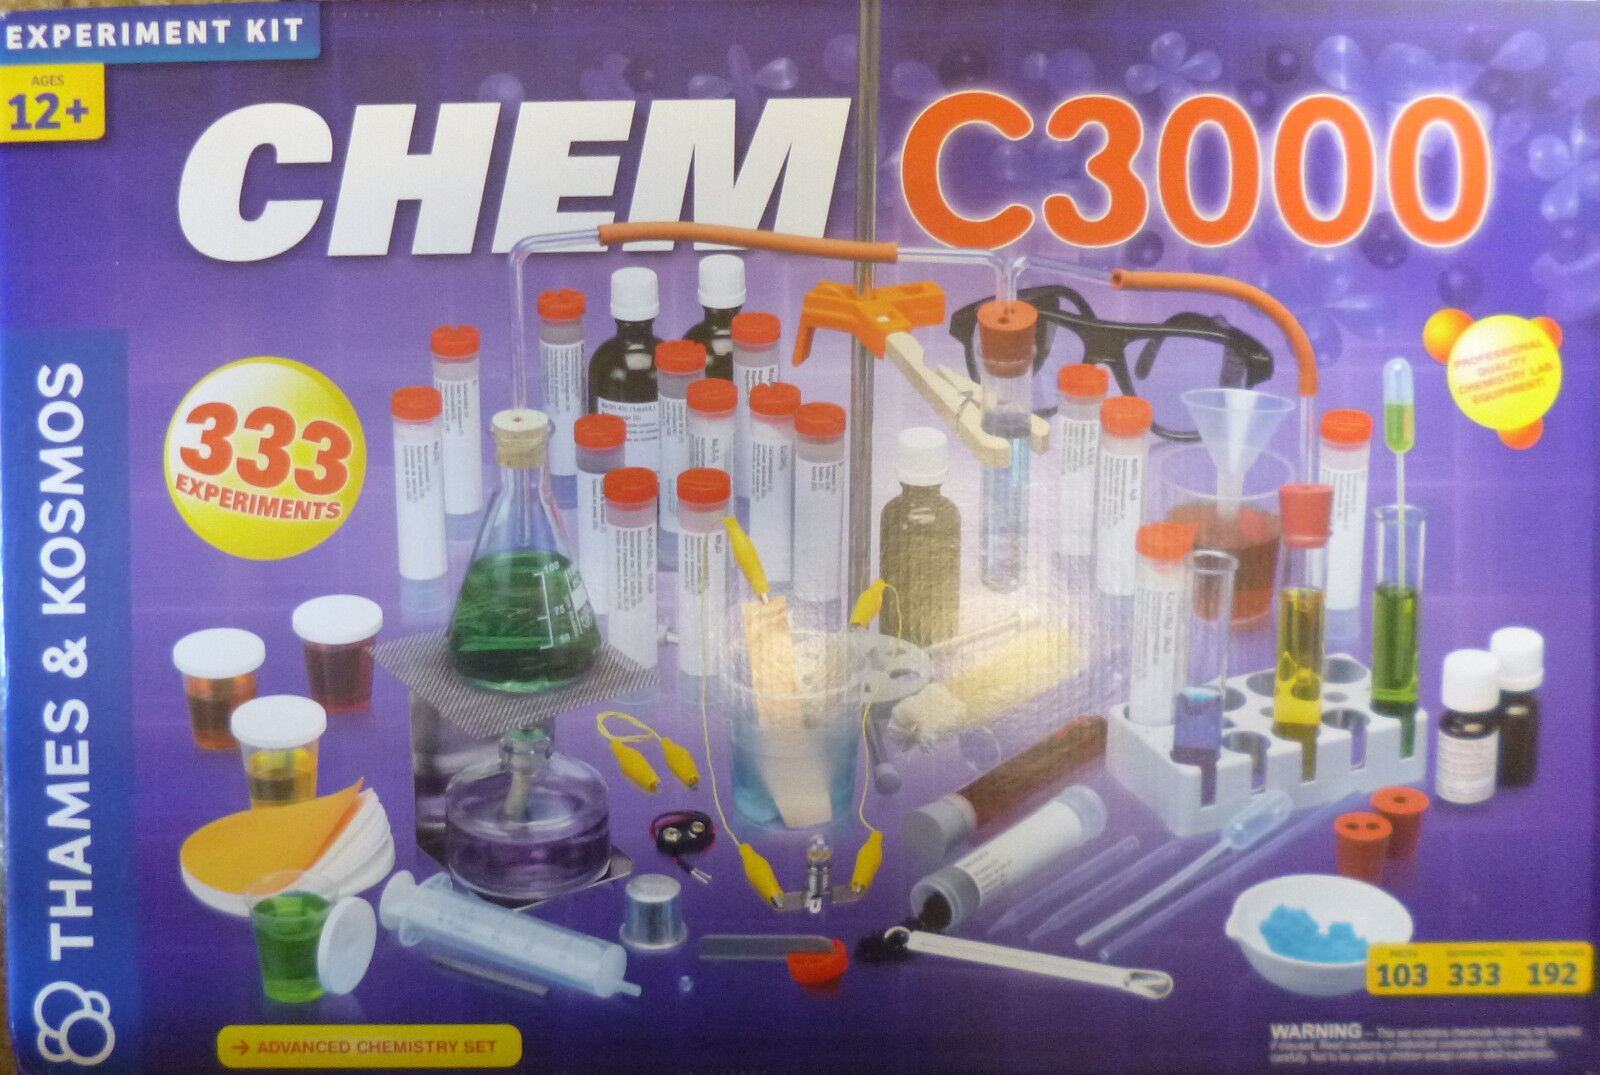 THAMES & KOSMOS CHEMISTRY CHEM C3000 DISCOVERY SCIENCE KIT 333 EXPERIMENTS 